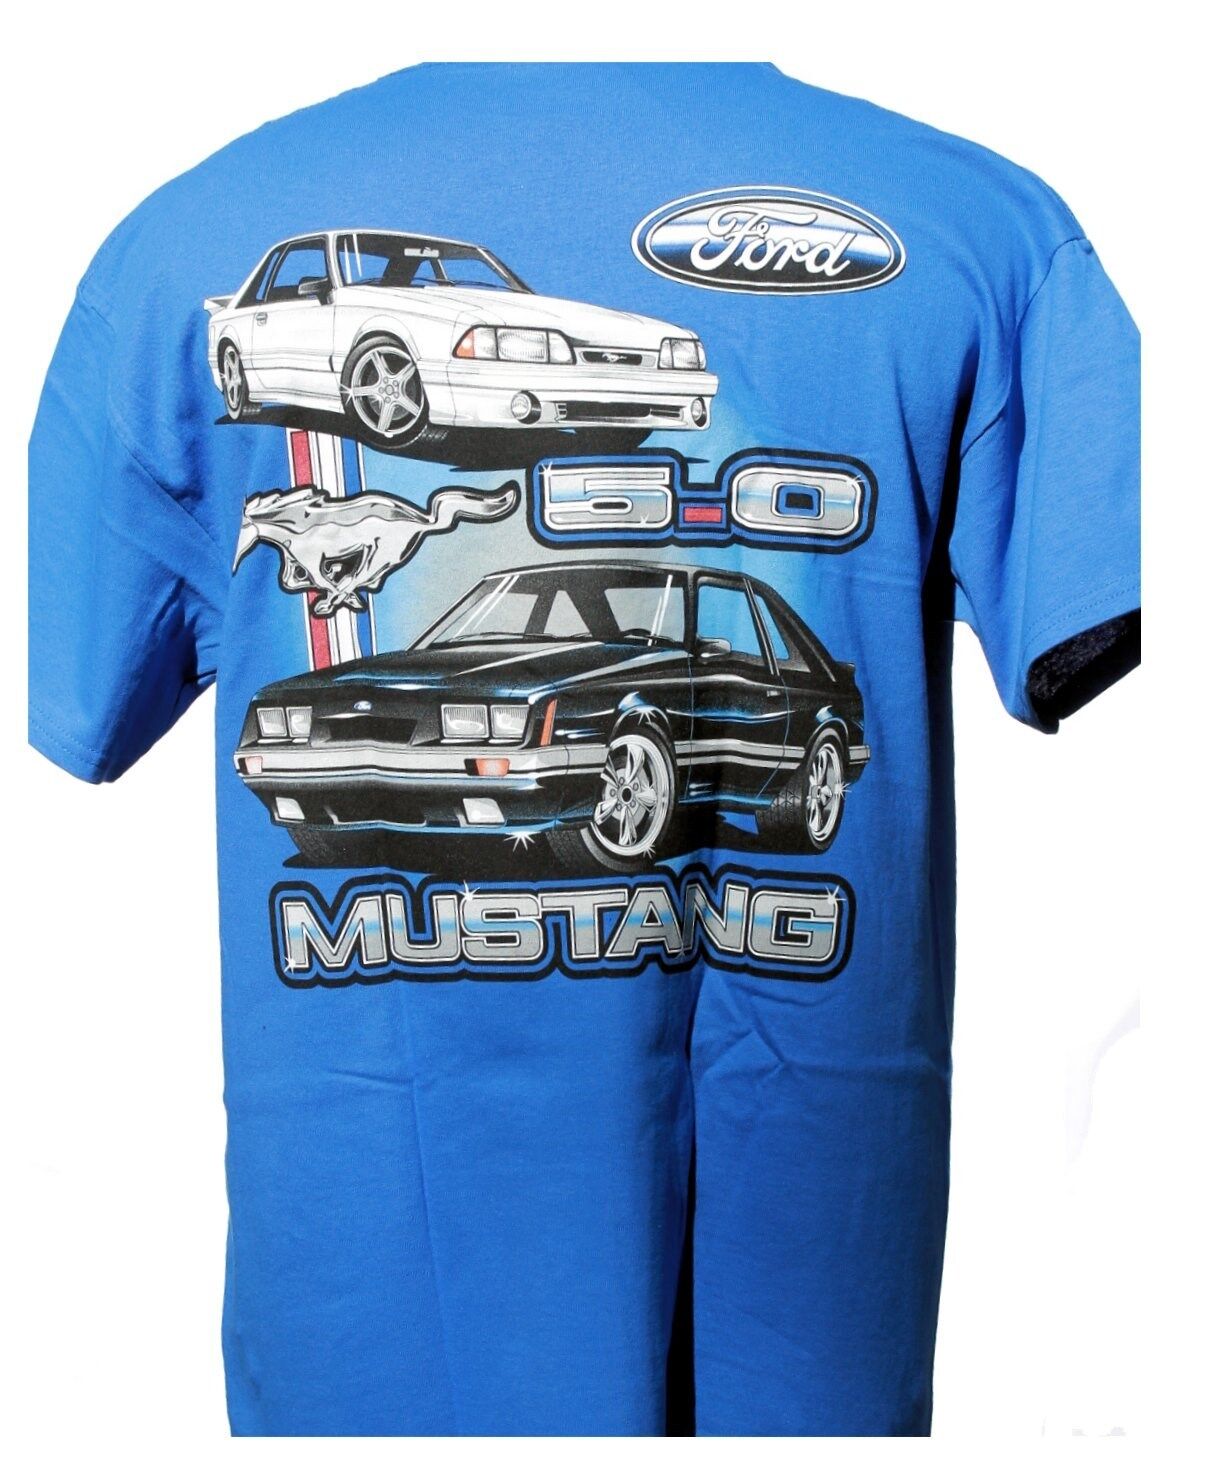 MUSTANG FOX BODY 2 CAR 2 SIDED SHIRT SOLD EXCLUSIVELY HERE